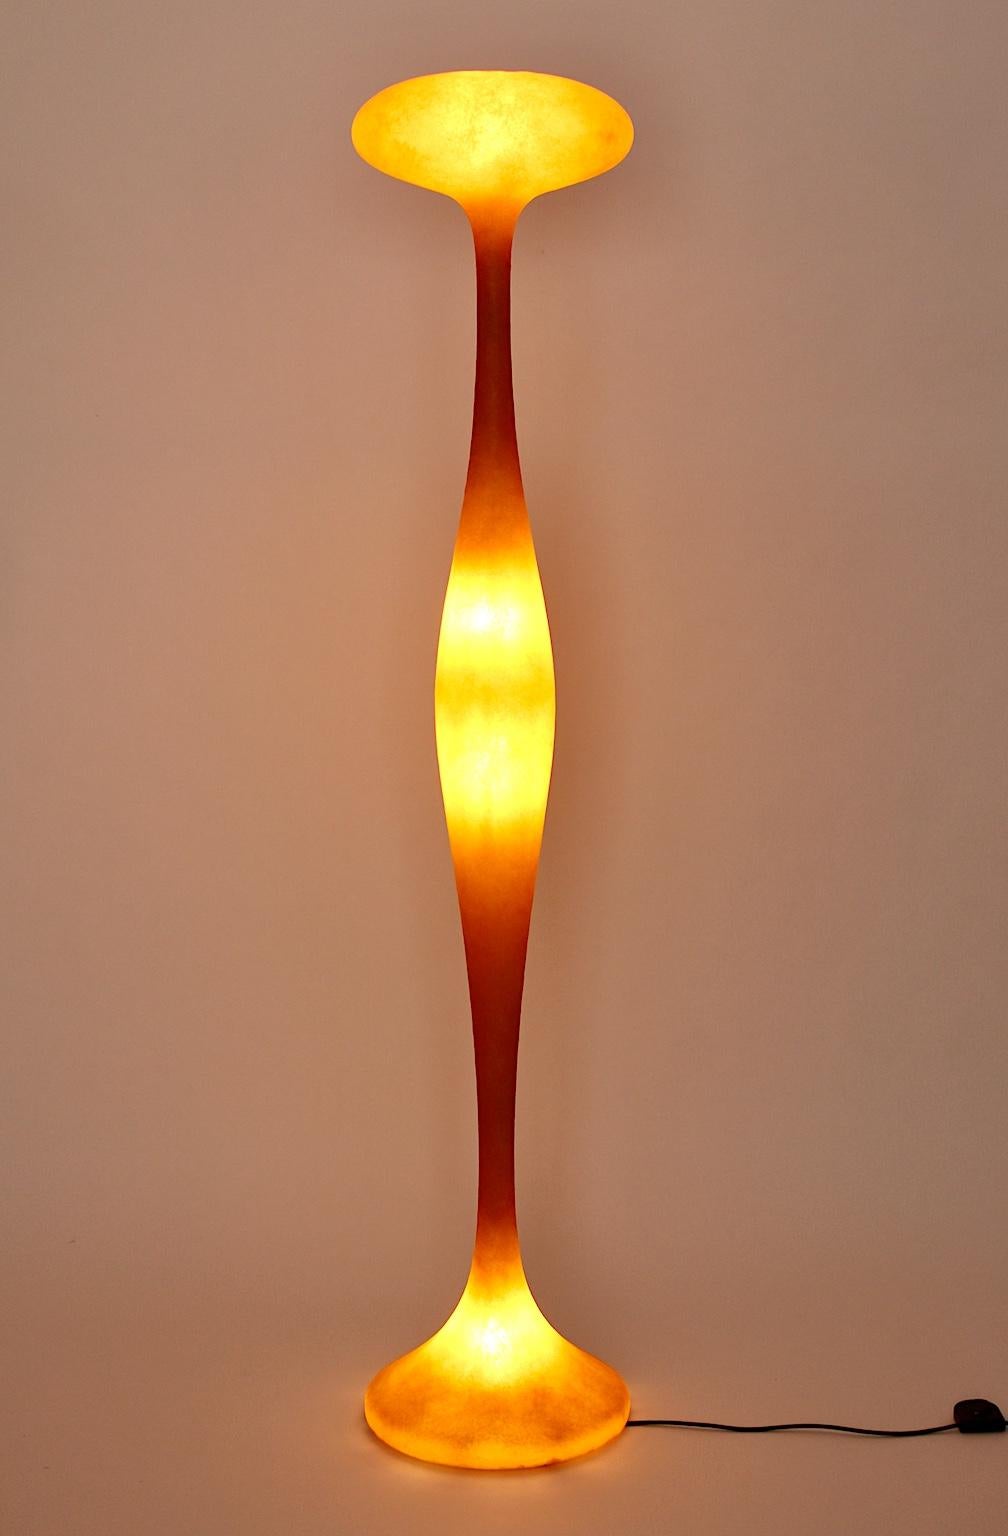 A modern orange original vintage Guglielmo Berchicci floor lamp, which was designed for Kundalini, Italy.
The floor lamp´s shape is like a waving column in a futuristic design in a bold color orange.
It was made out of fiberglass, which is layered